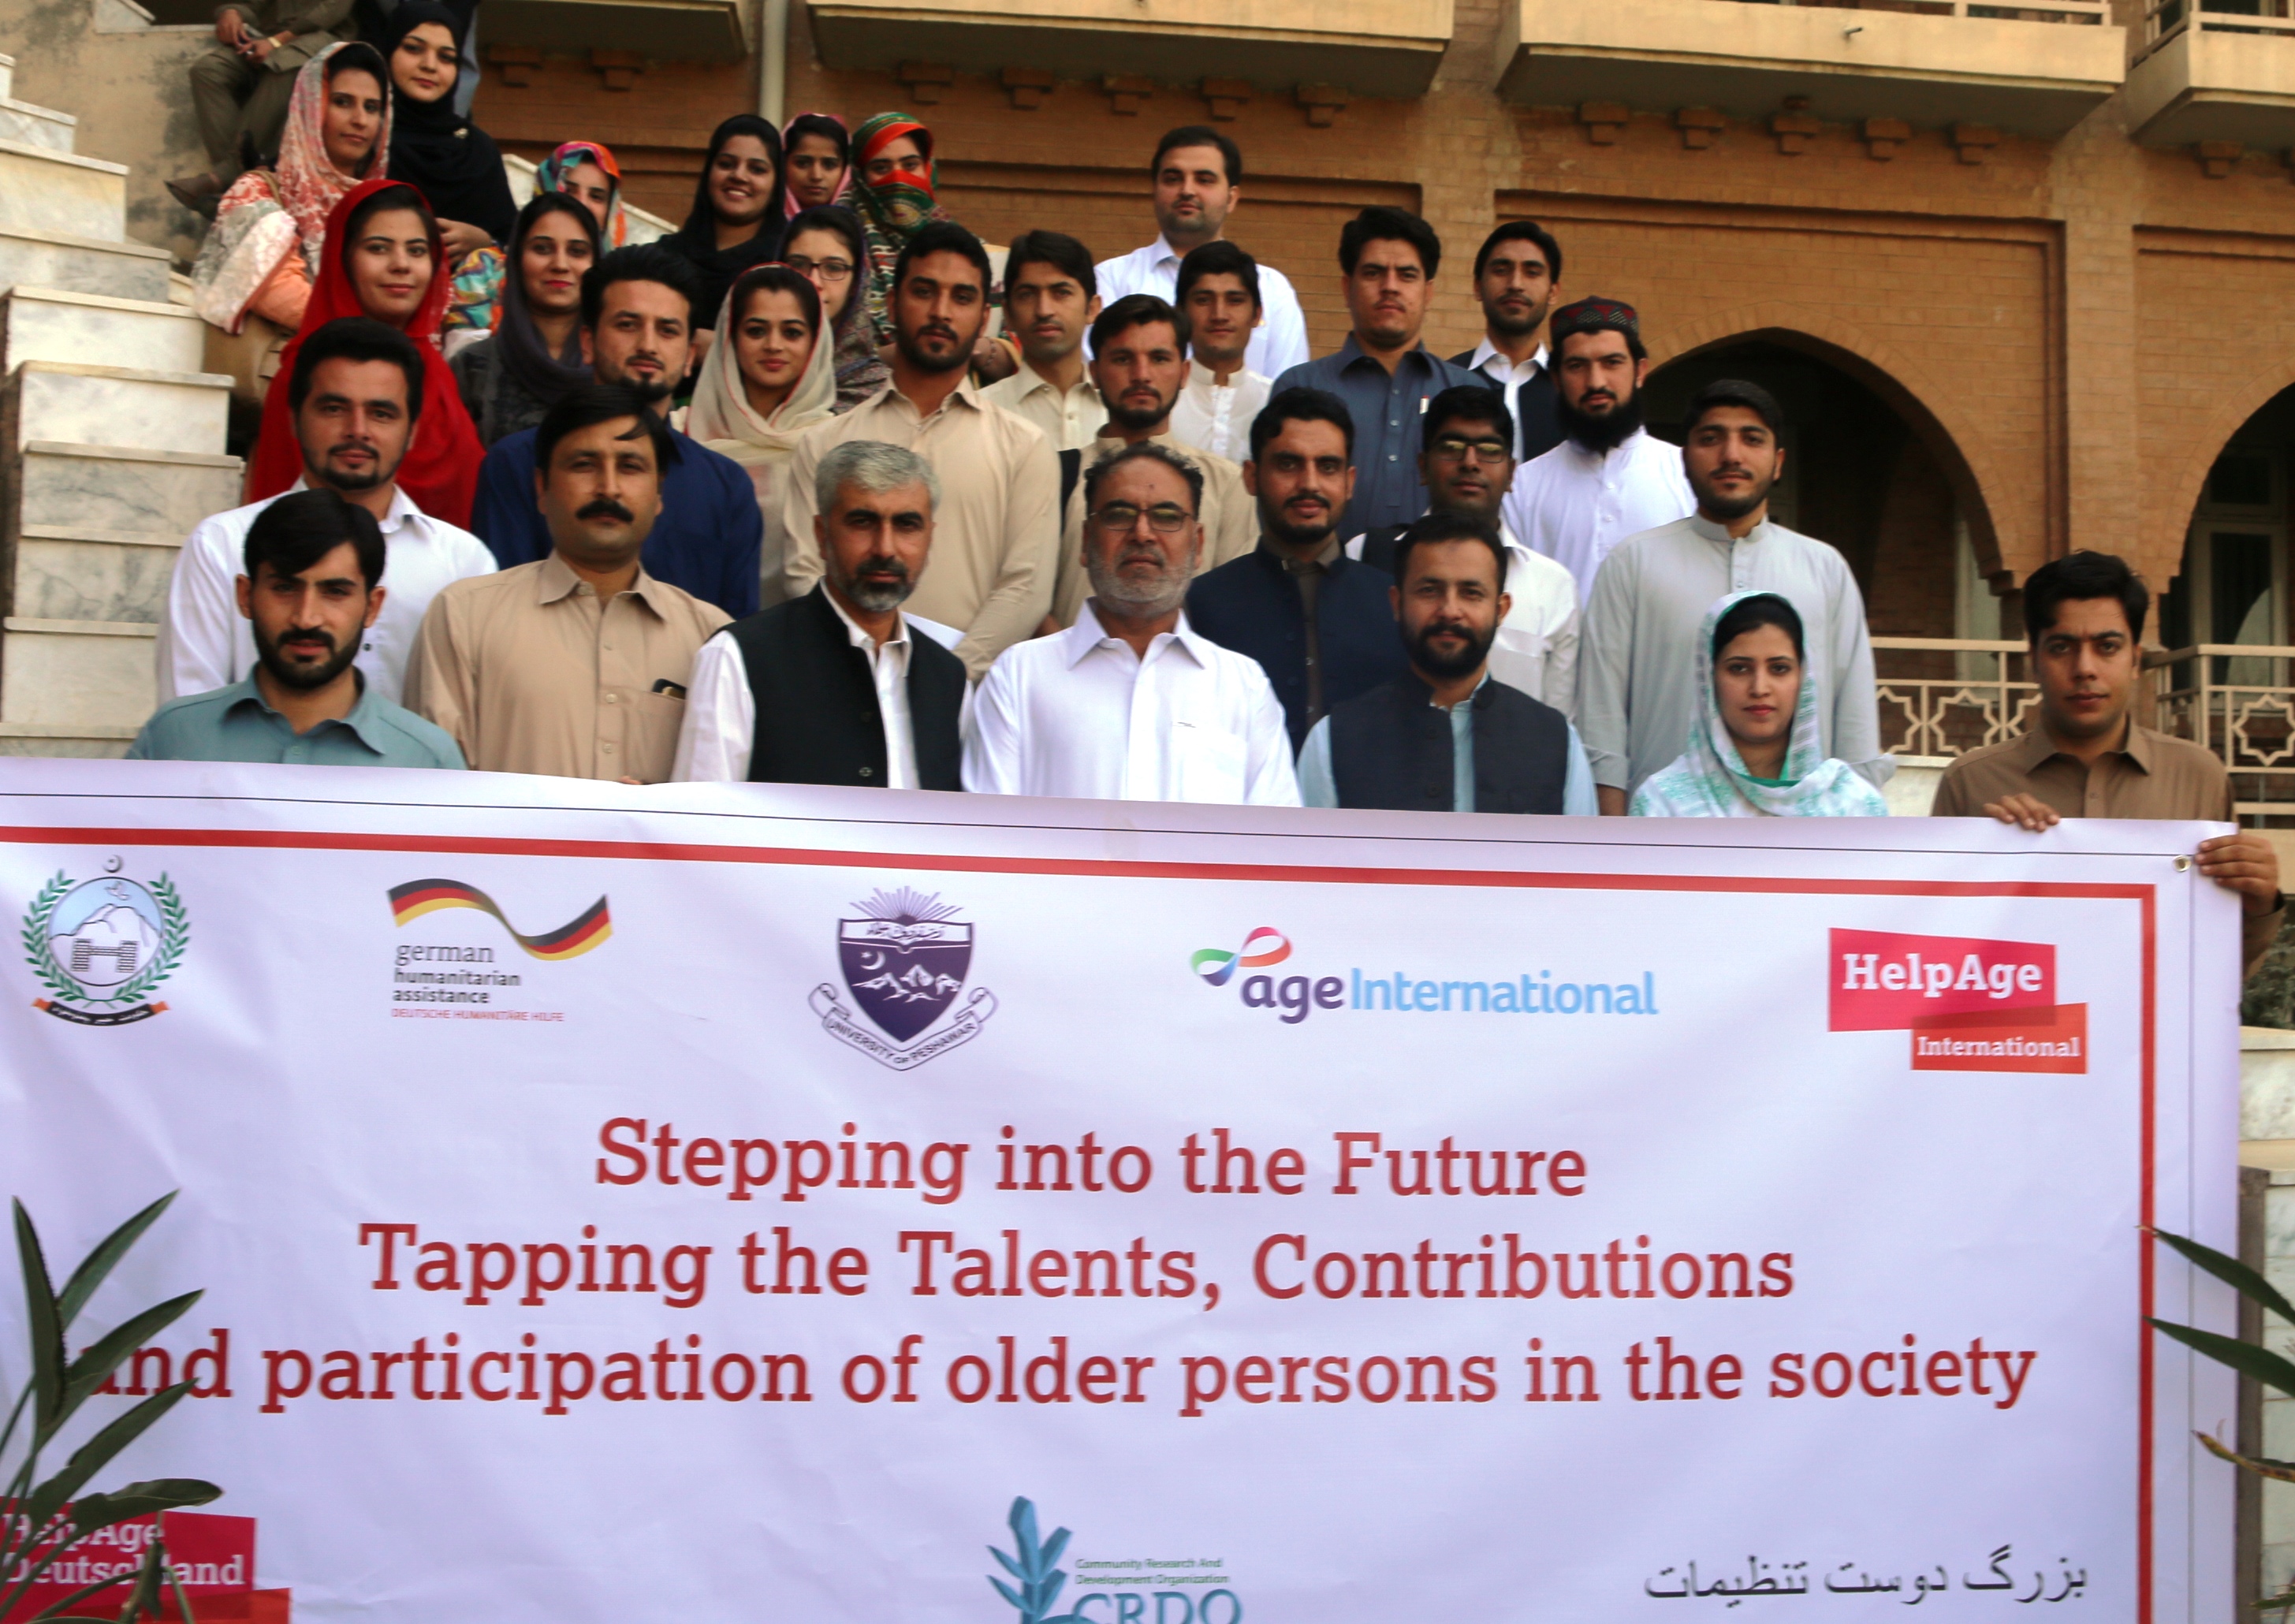 Department of Social Work University of Peshawar in collaboration with HelpAge International and Community Research Development Organization (CRDO) with support of by German Federal Ministry of Economic Cooperation and Development (BMZ) organized a seminar on �Stepping into the Future: Tapping the Talents, Contributions and participation of older persons in the Society�. 
Dr. Rasheed Khan, Chairman Social Work Department was the chief guest at the occasion; he welcomed the participants and cong